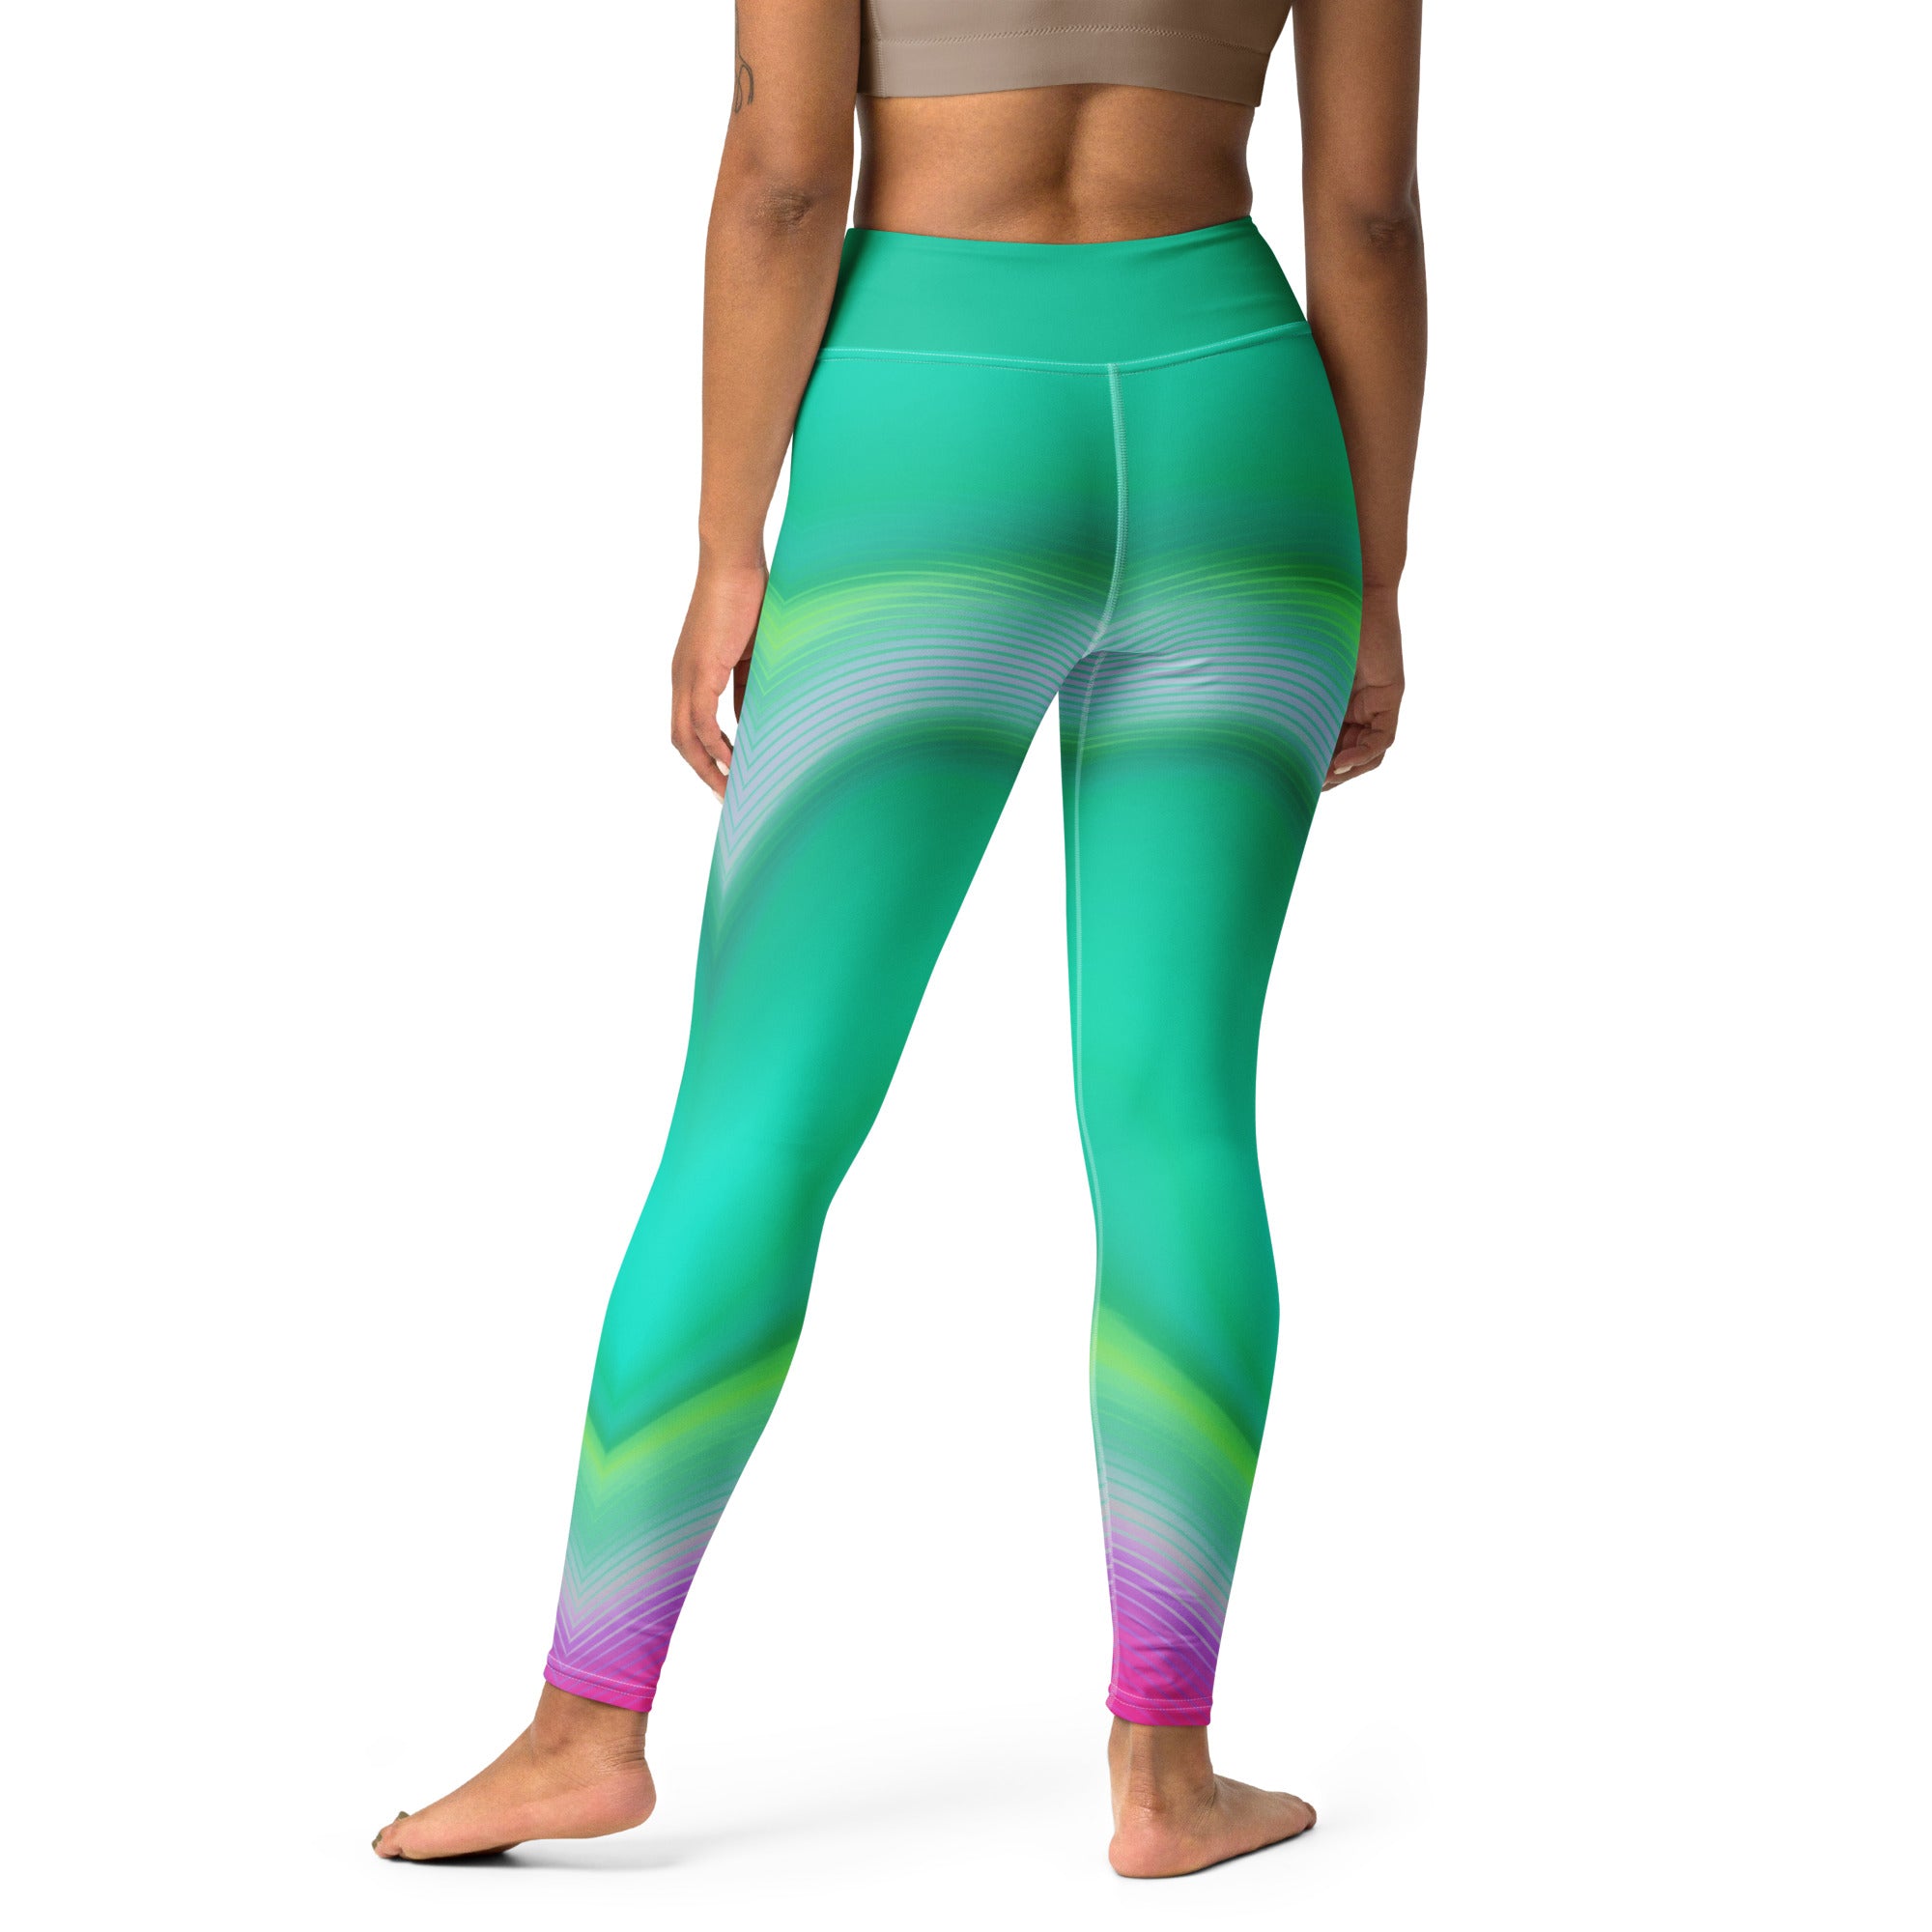 Vibrant Wave Leggings adding a burst of color to an outdoor yoga session.